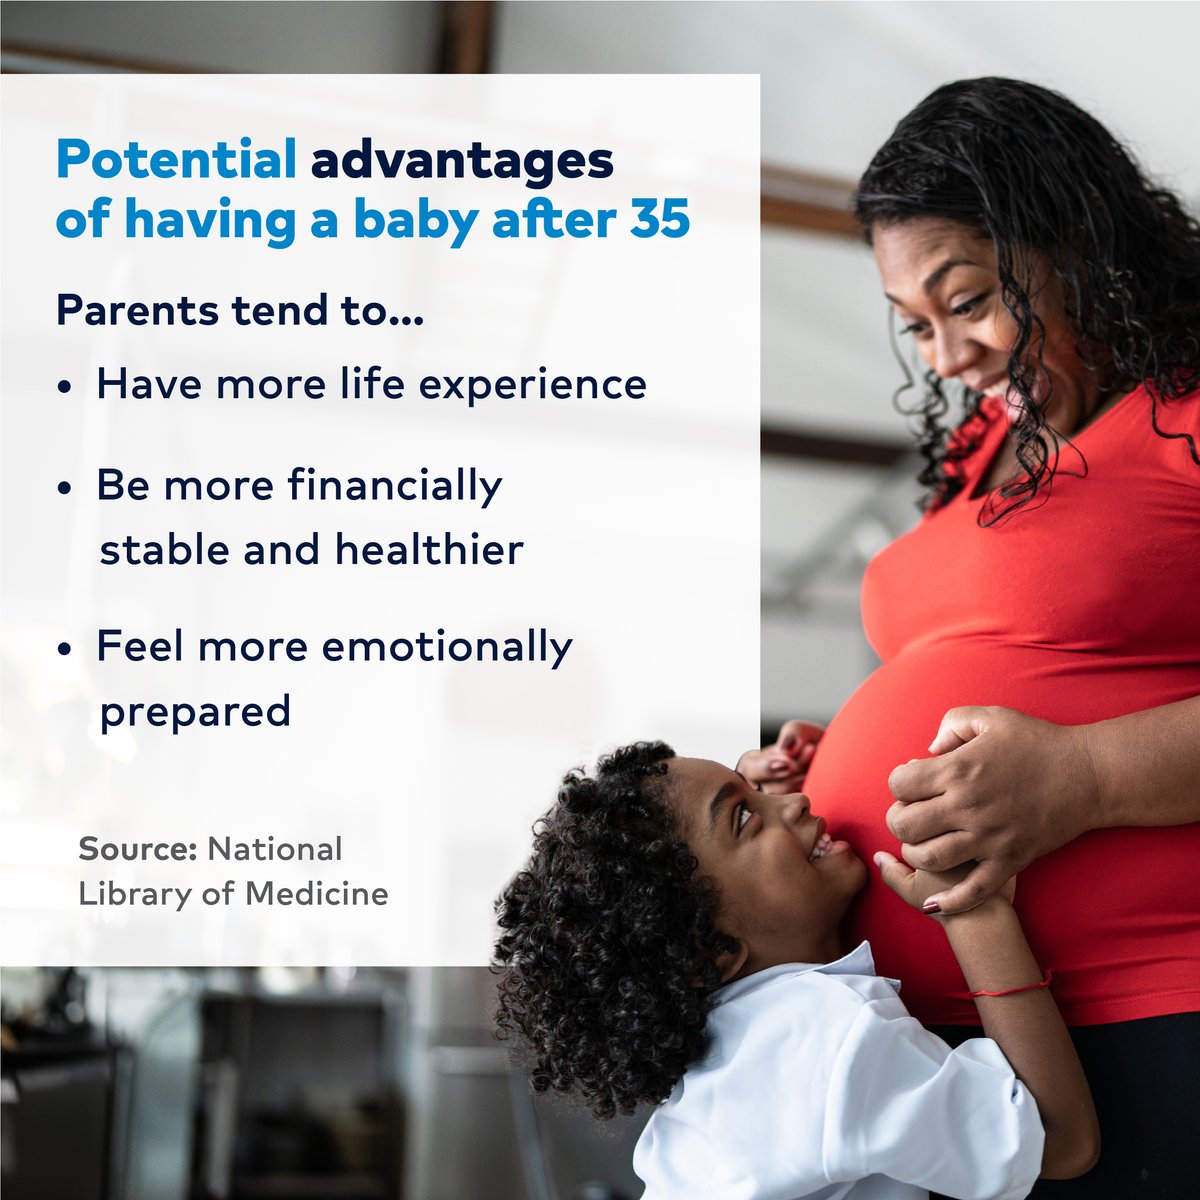 There's no set timeline for having a baby. If you're thinking about getting pregnant after age 35, you may want to consider these potential advantages and risks. Find an OB/GYN or midwife at healthonecares.com. #HealthierTomorrows #ImproveMoreLives